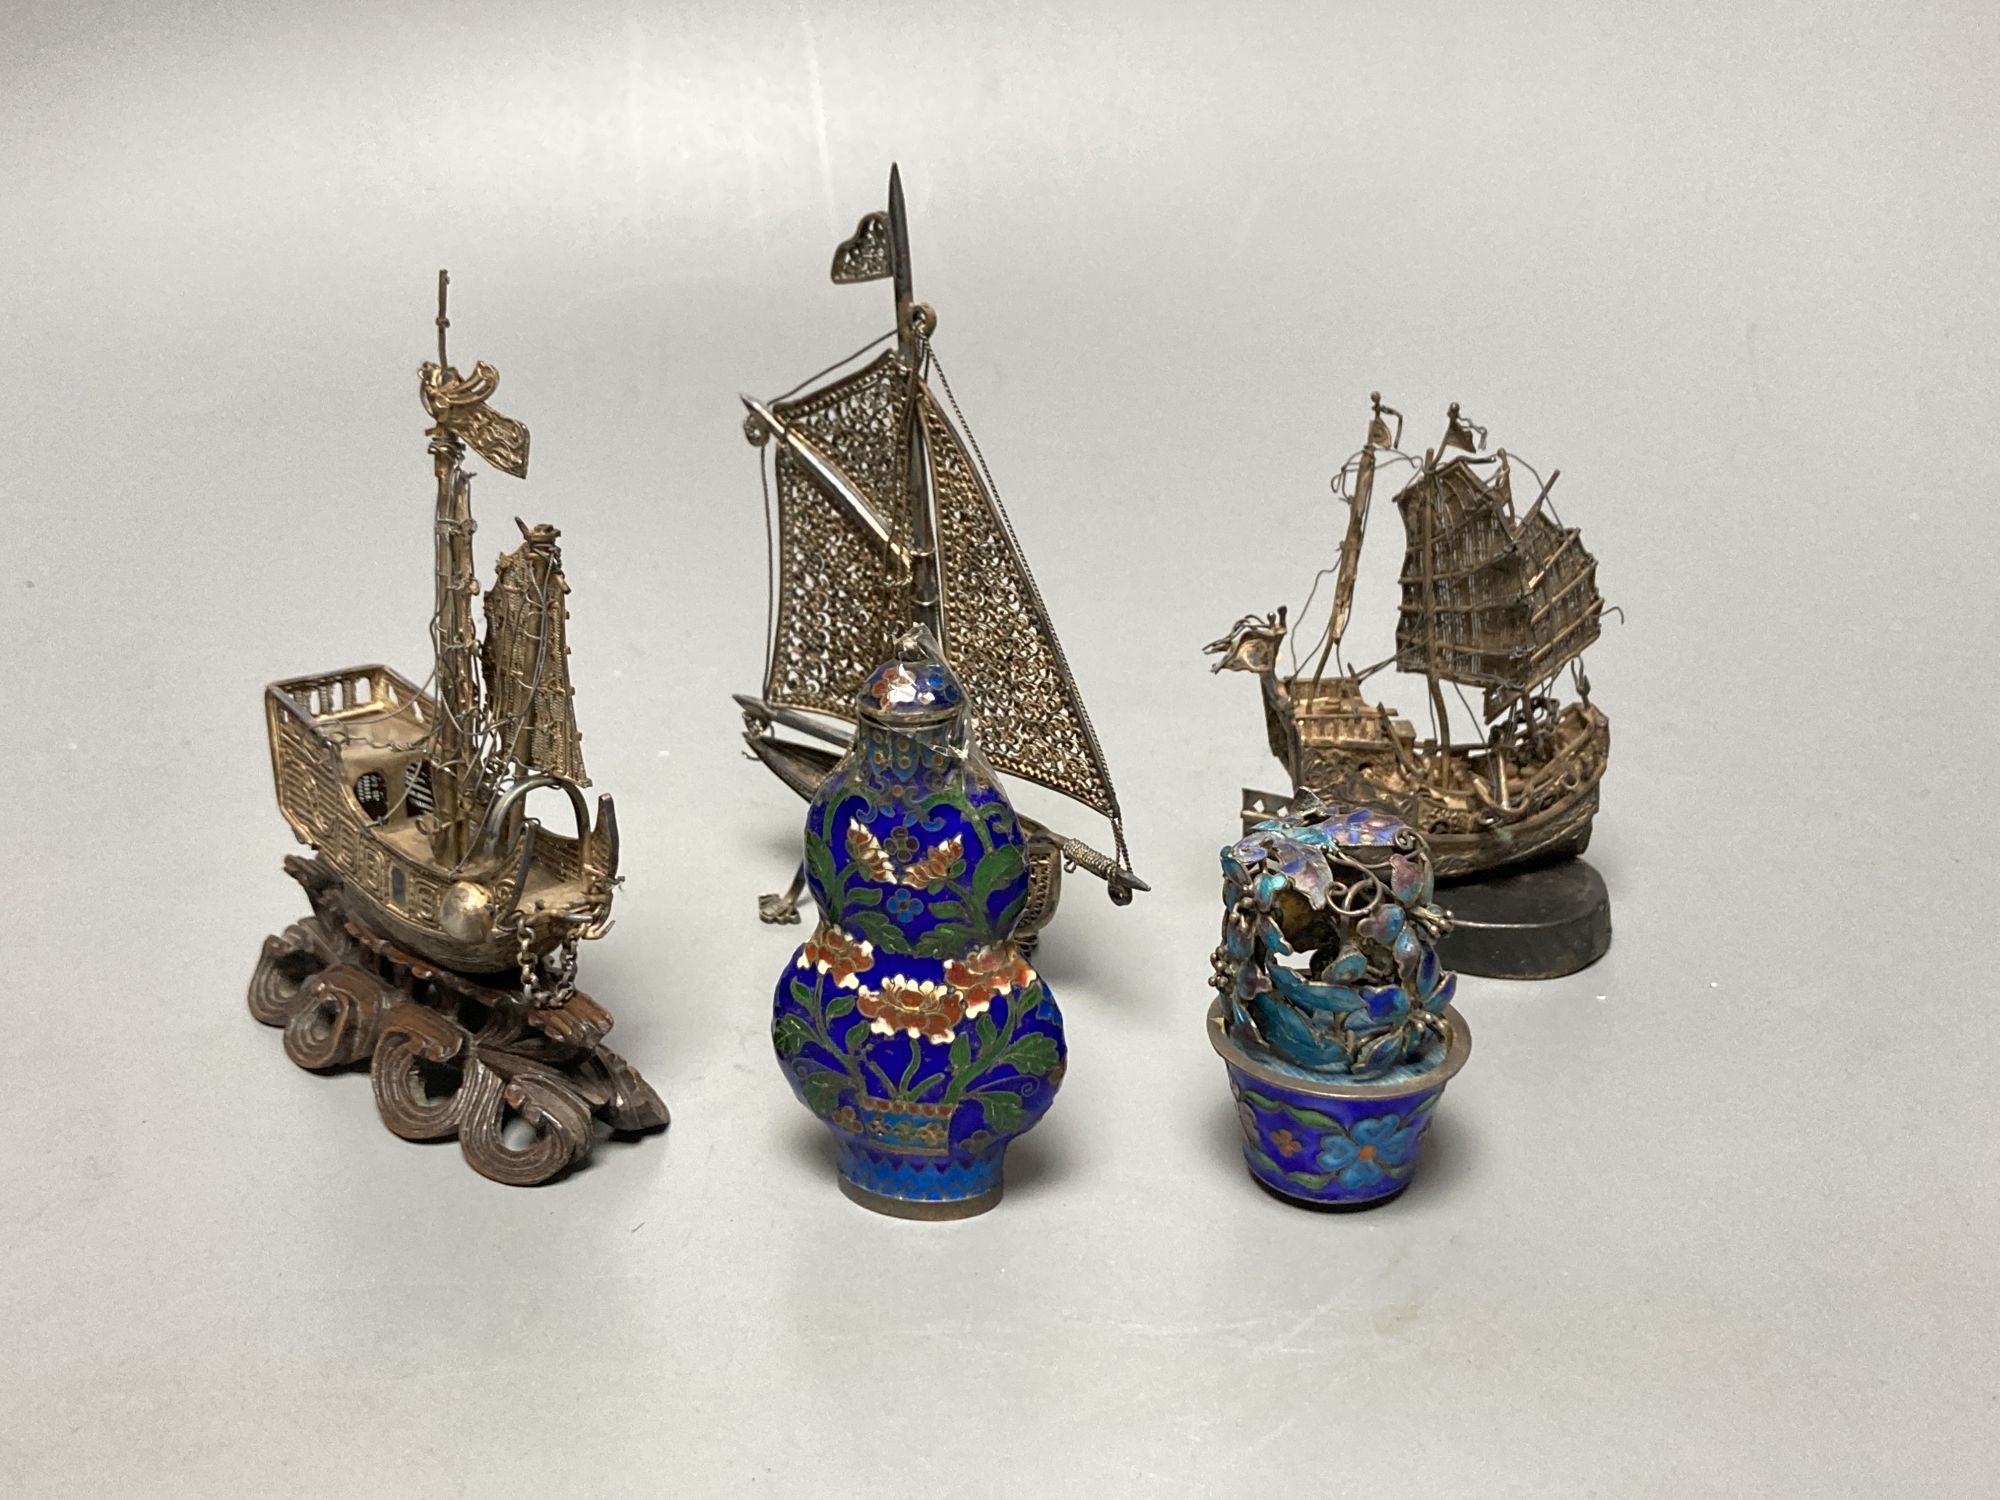 Three filigree boats, an enamelled flower pot and a snuff bottle